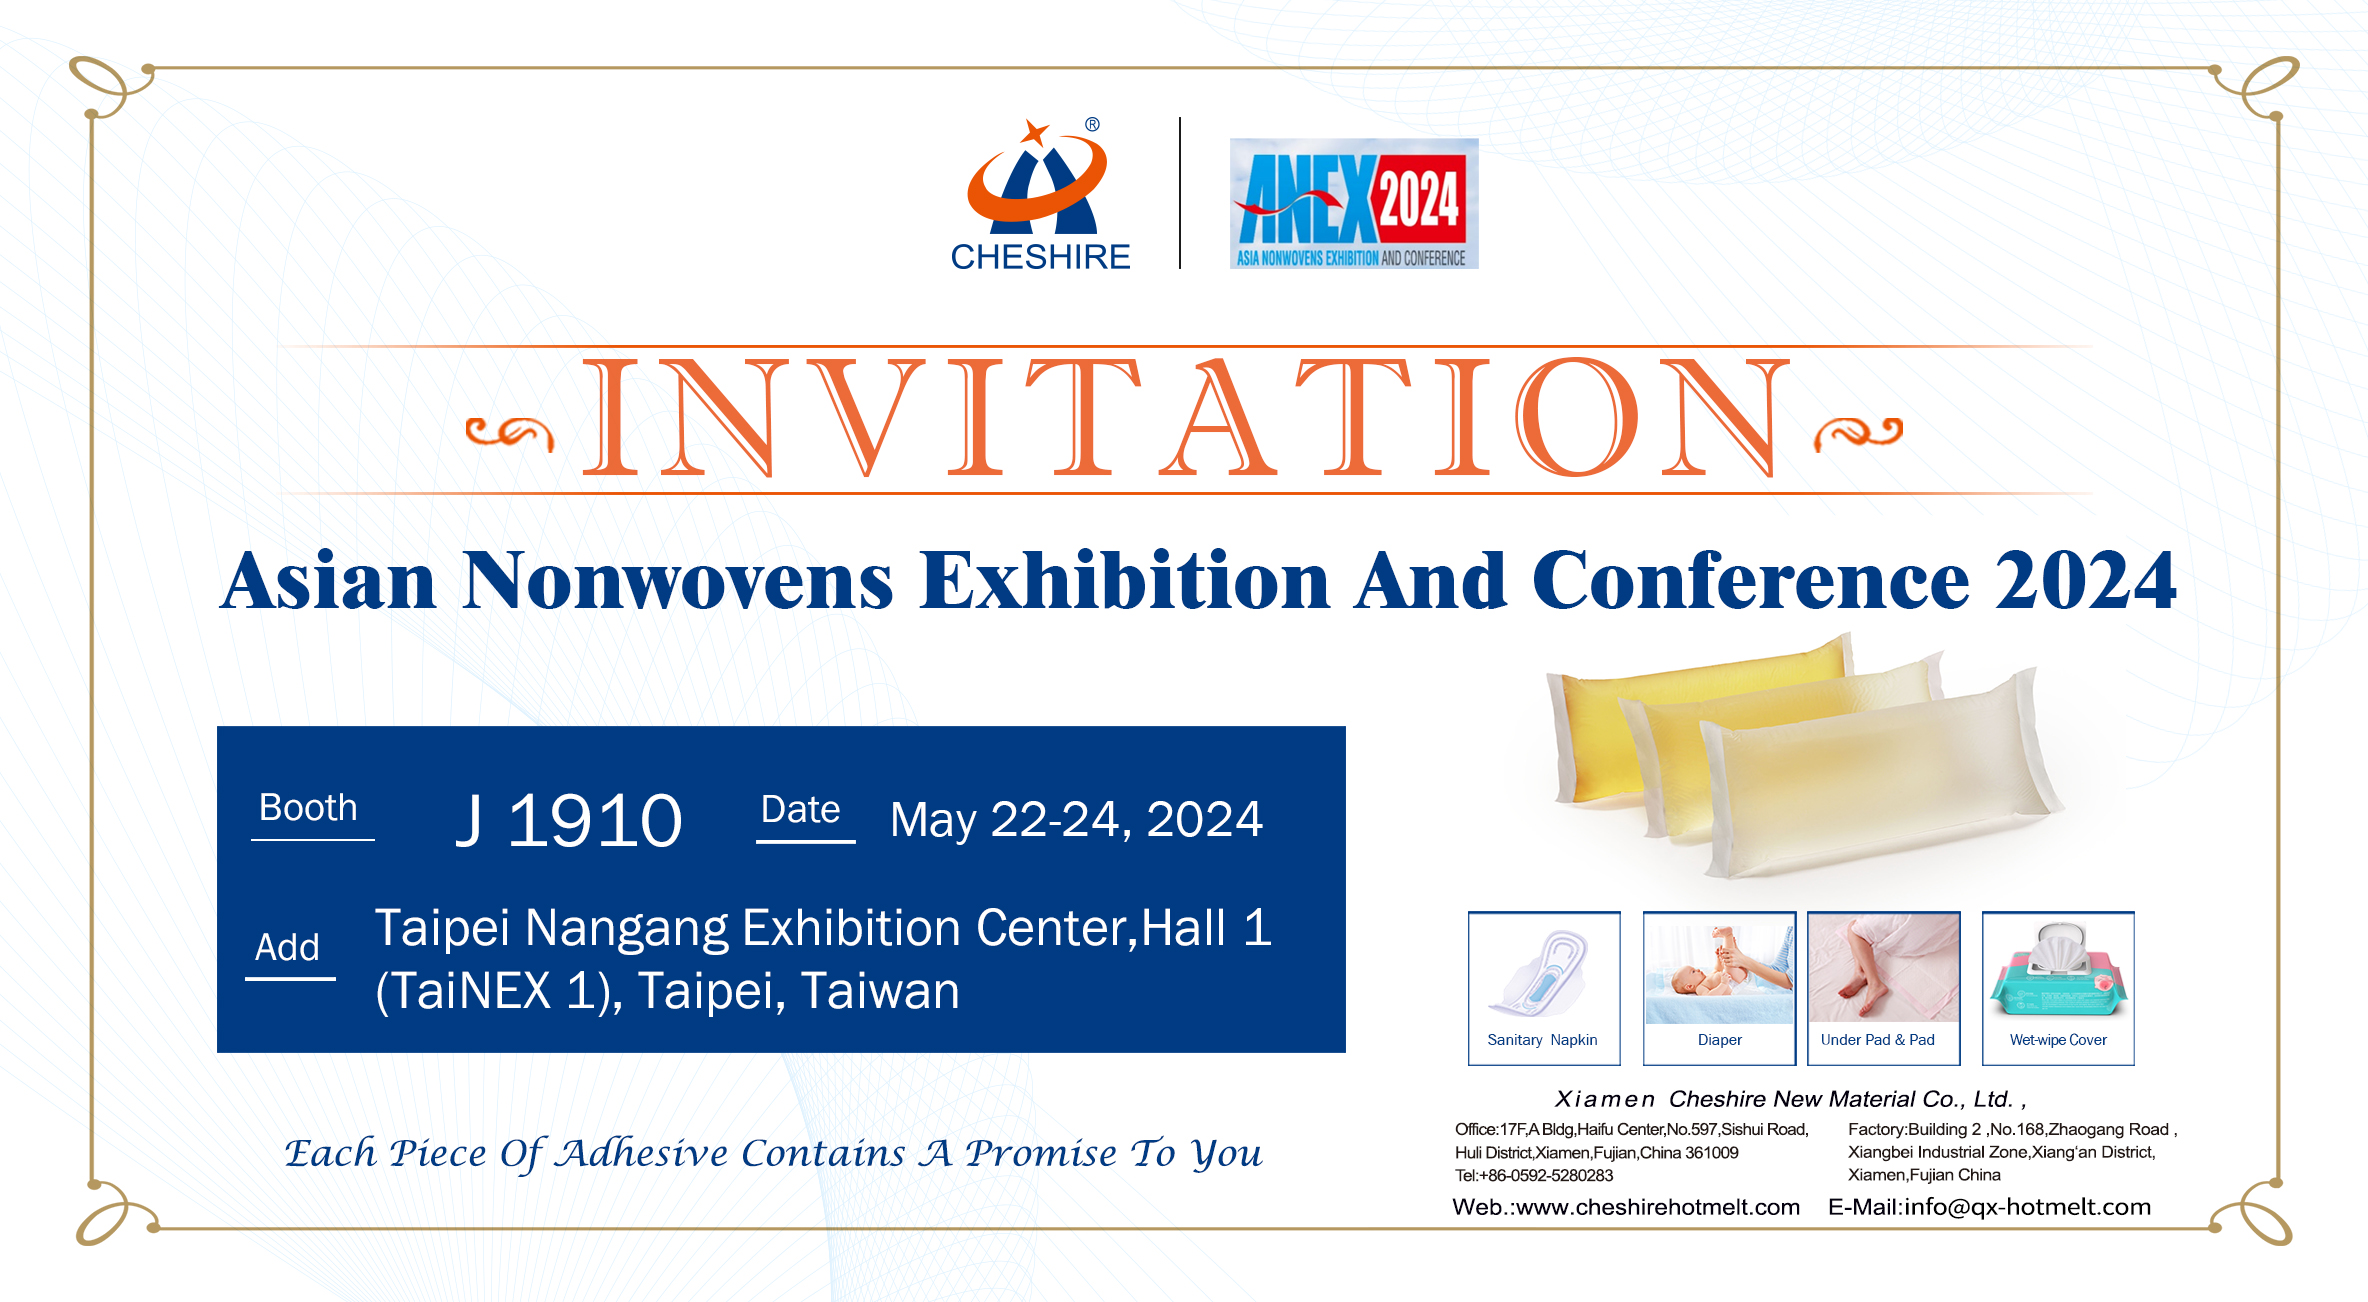 Asian Nonwovens Exhibition AndConference 2024